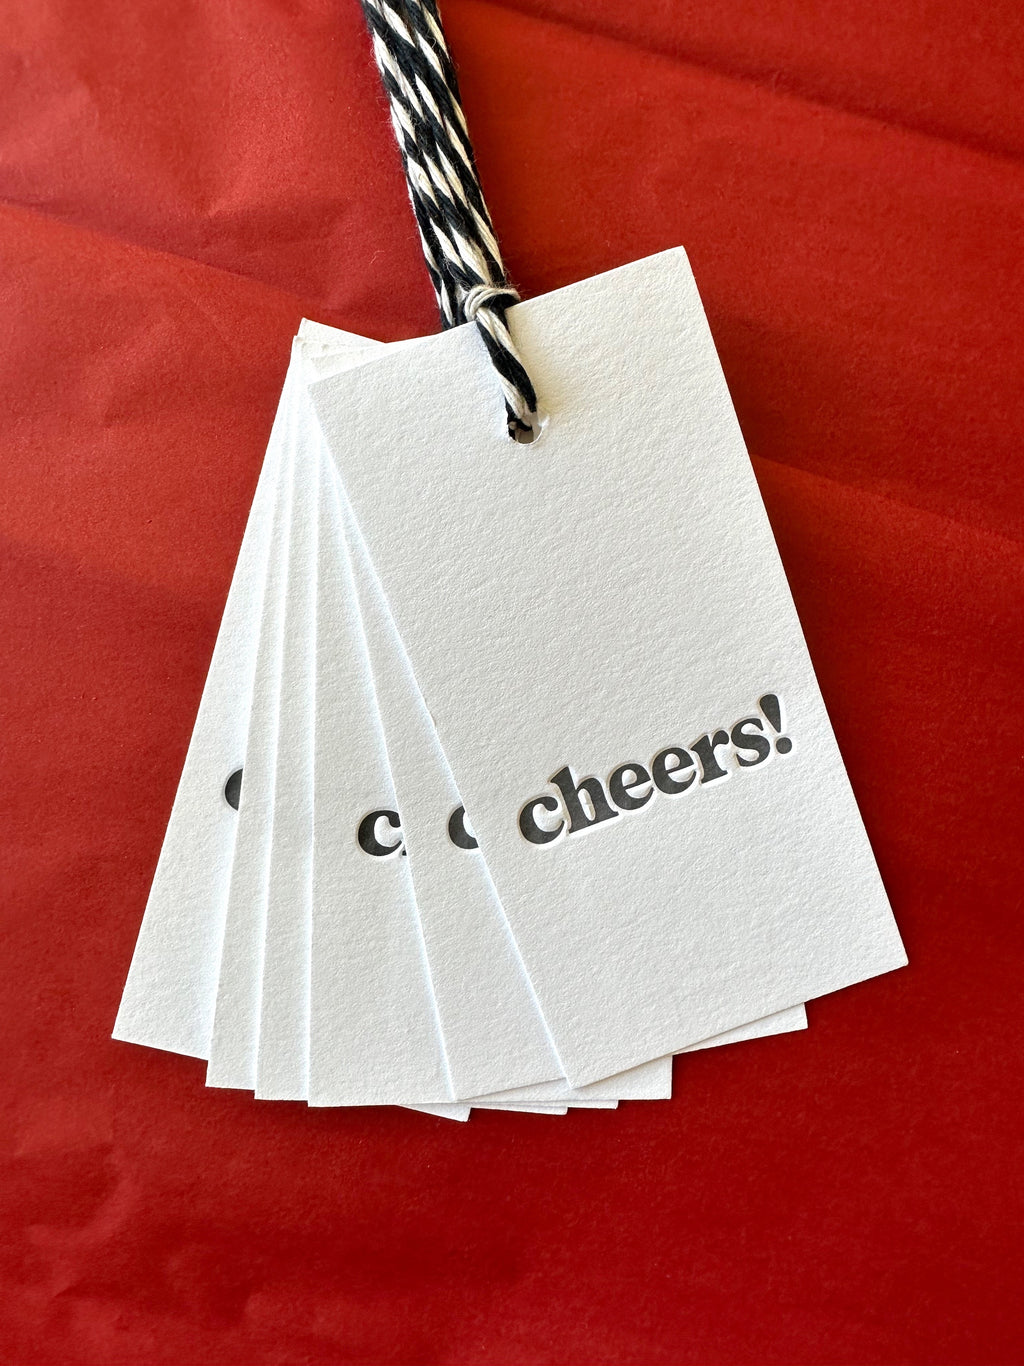 Wine Gift Tags